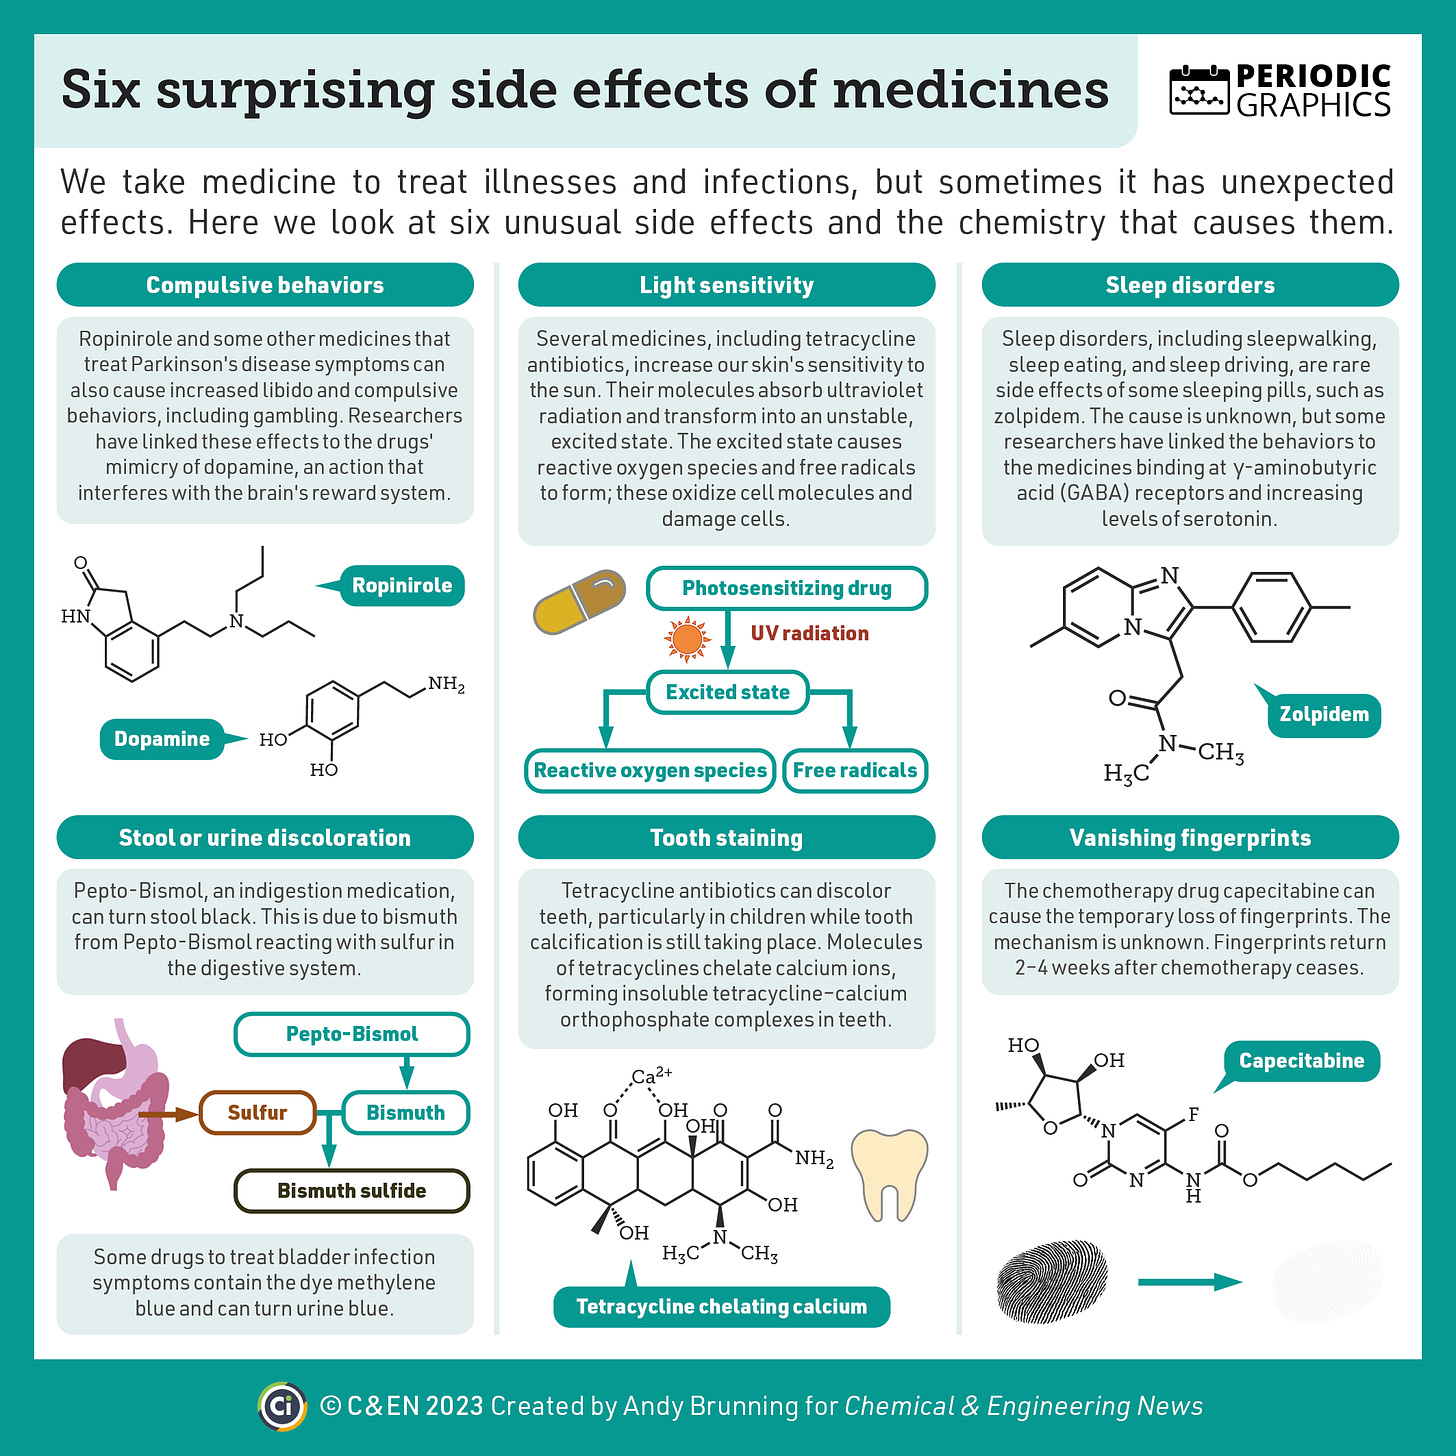 Infographic detailing six unusual side effects of some medications and how they arise. The six side effects are compulsive behaviors, caused by some medicines that treat Parkinson’s disease symptoms; light sensitivity, caused by medicines including tetracyclines; sleep disorders, which are caused by some sleeping pills; changes to stool or urine color, such as from Pepto-Bismol; tooth staining, which can occur with tetracycline antibiotics; and vanishing fingerprints, a side effect of the chemotherapy drug capecitabine. 